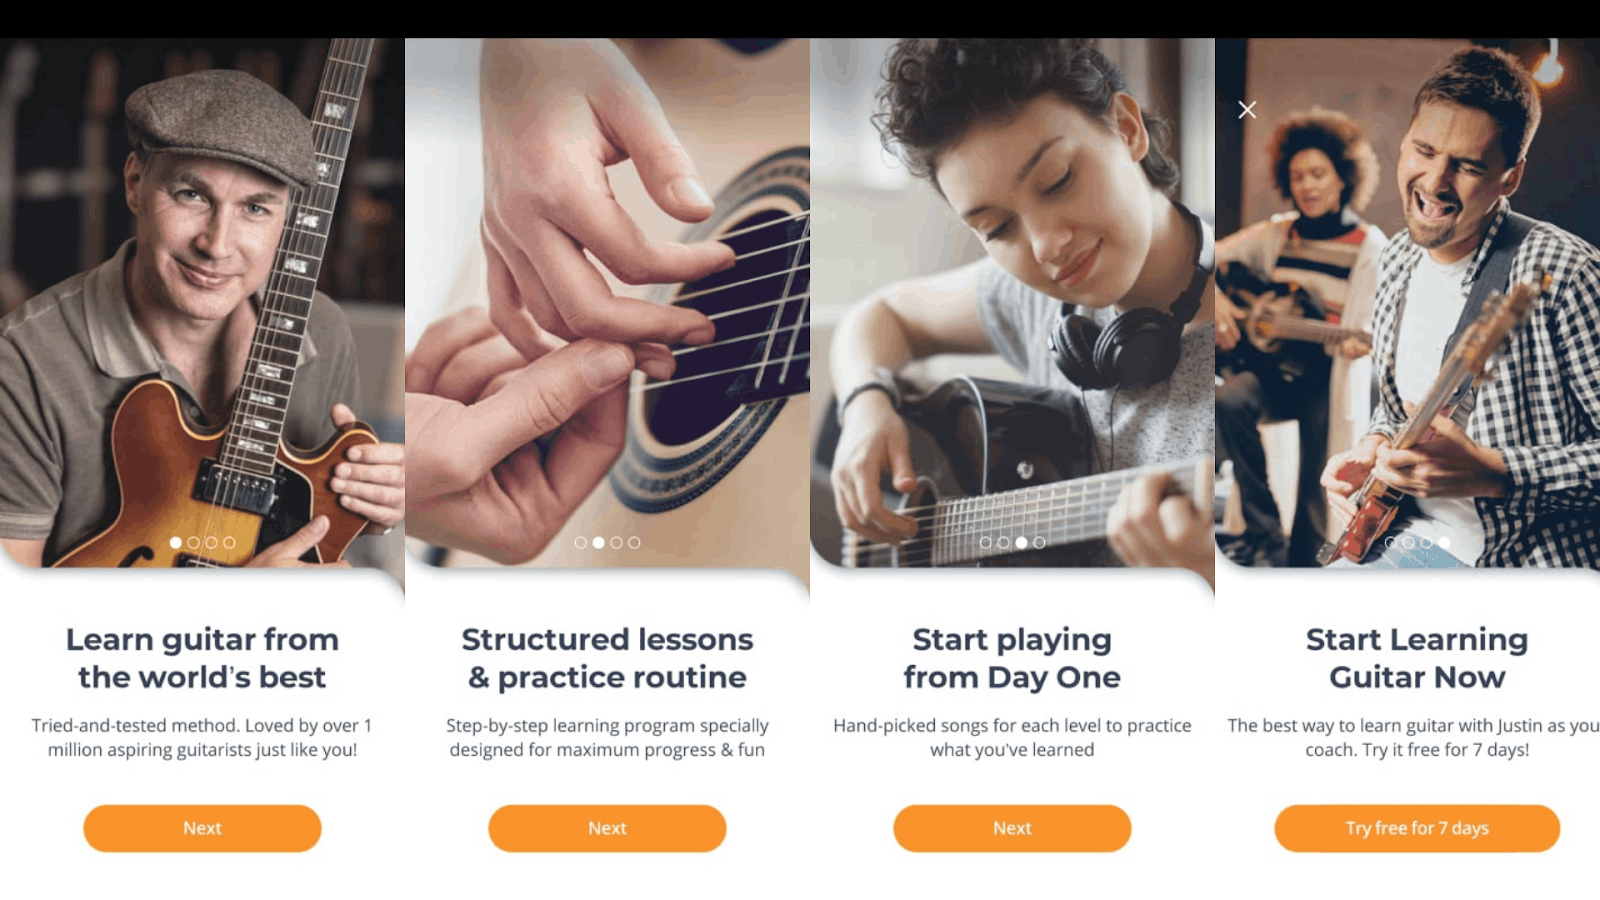 Discover This Application to Learn How to Play Guitar for Free